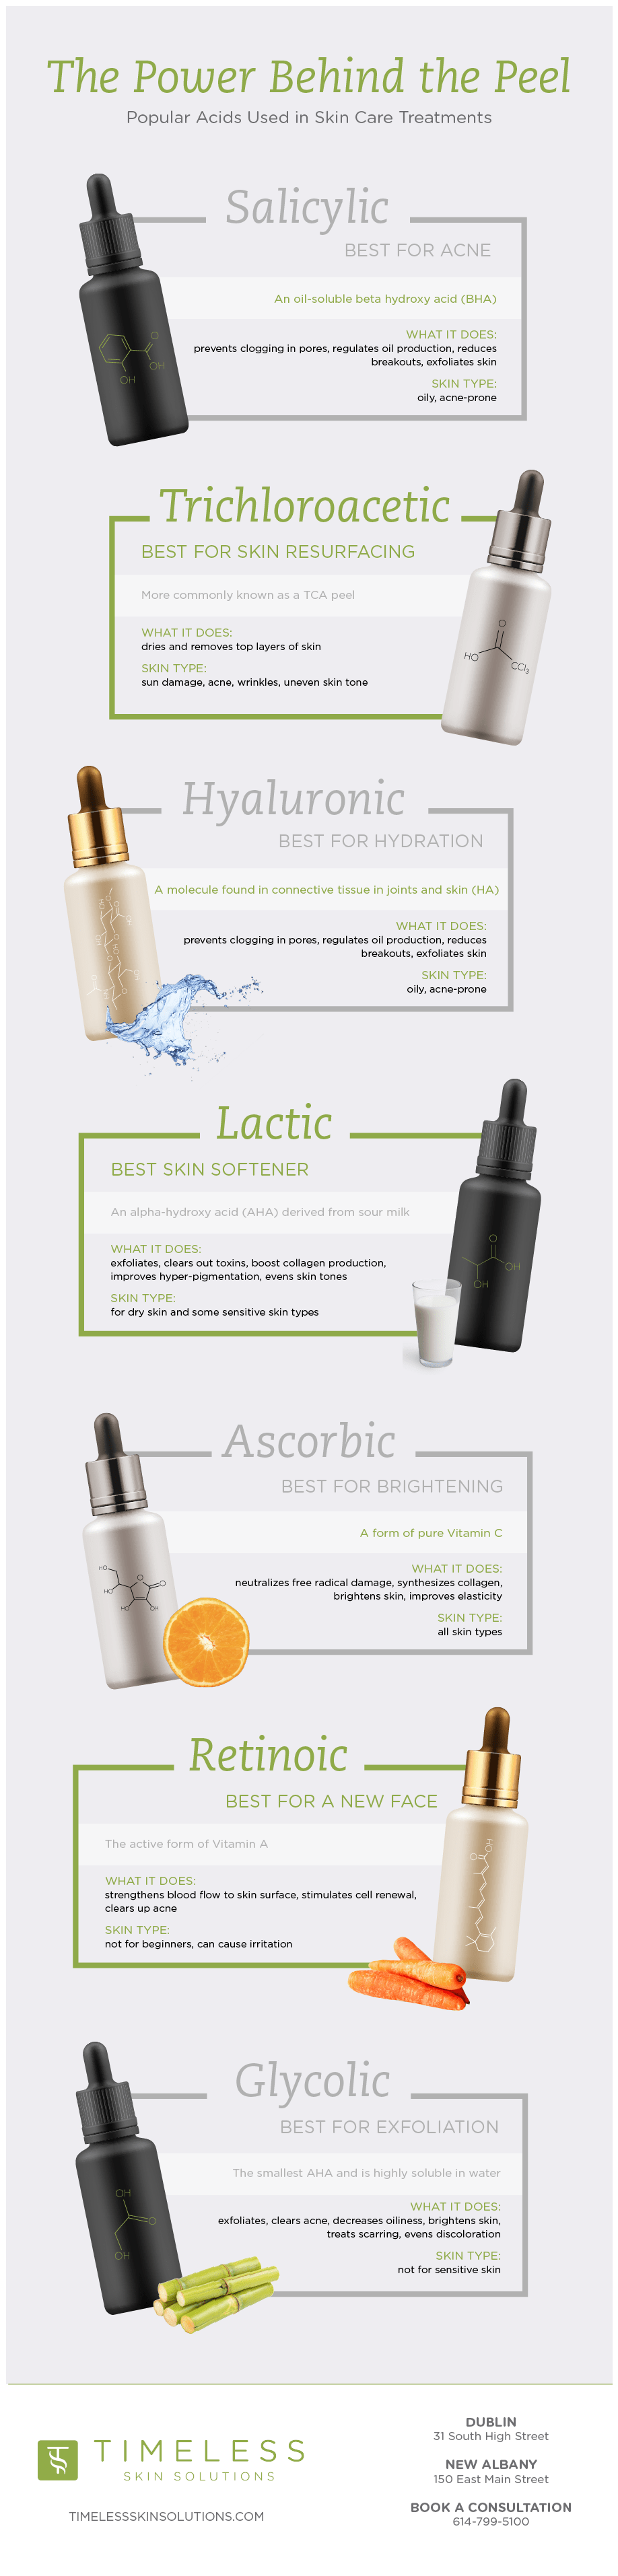 Infographic with details about chemical peel acids used in common products.